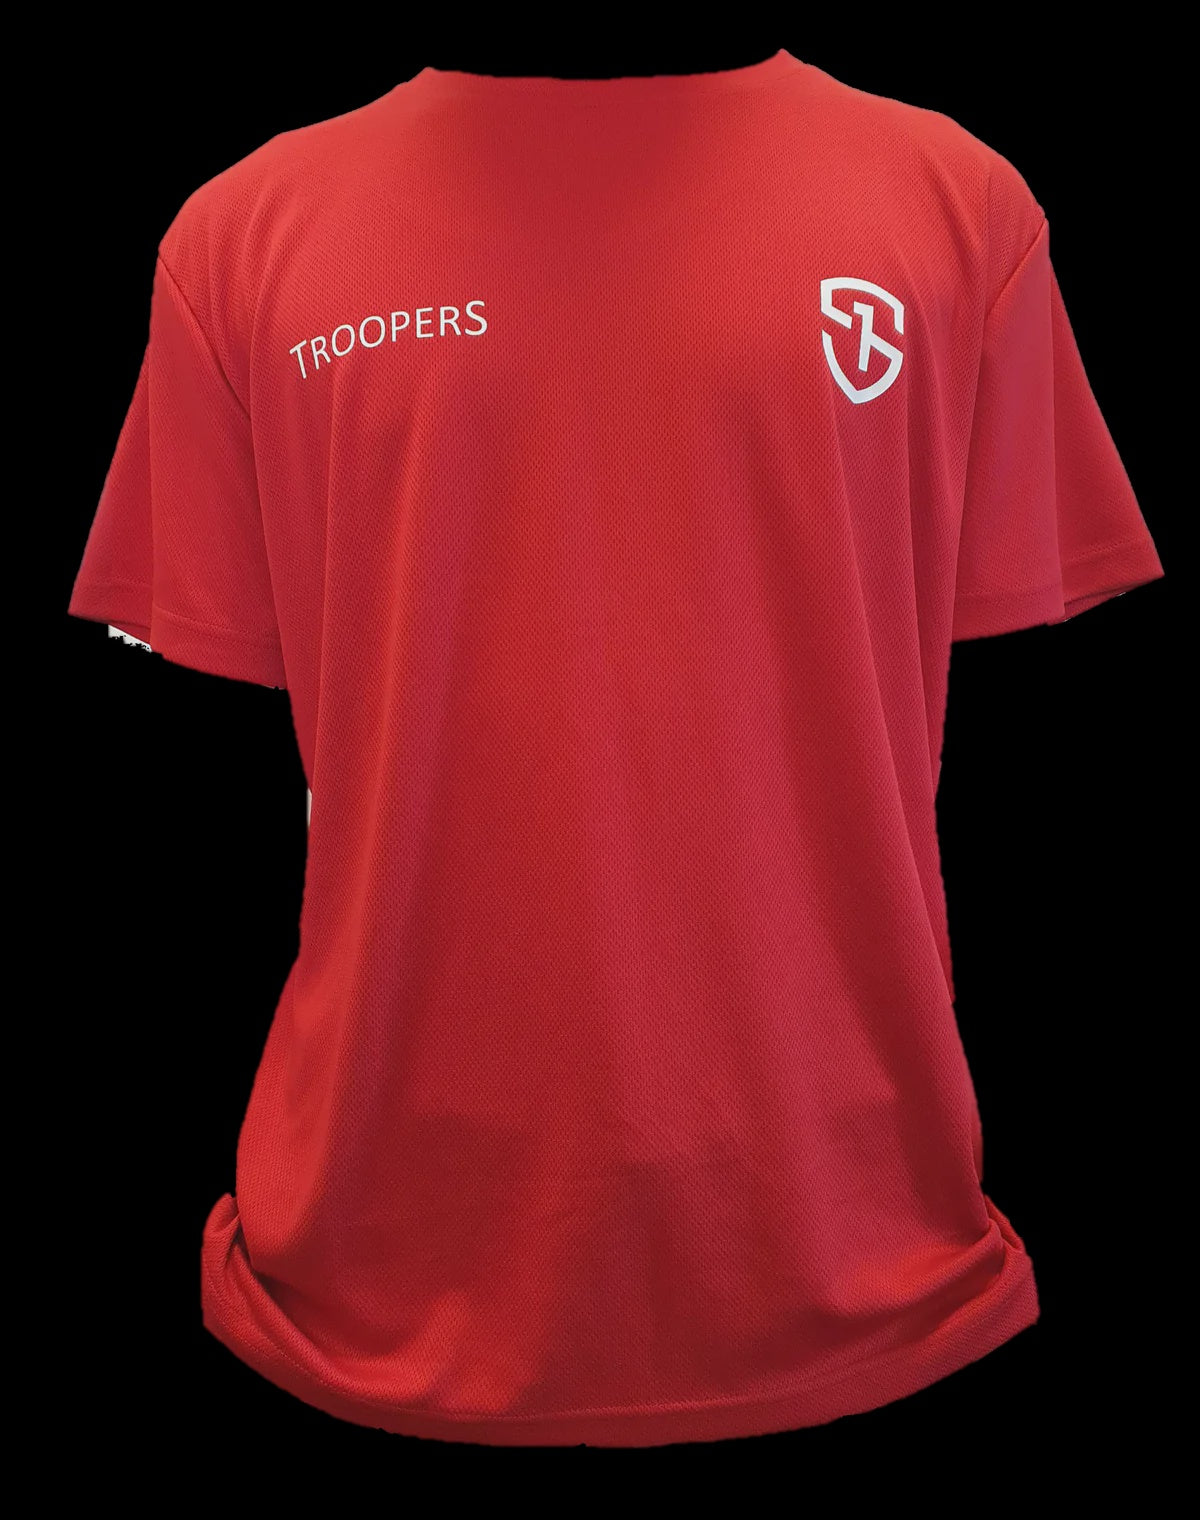 House Sports T-shirt - Troopers (Red) Size 14